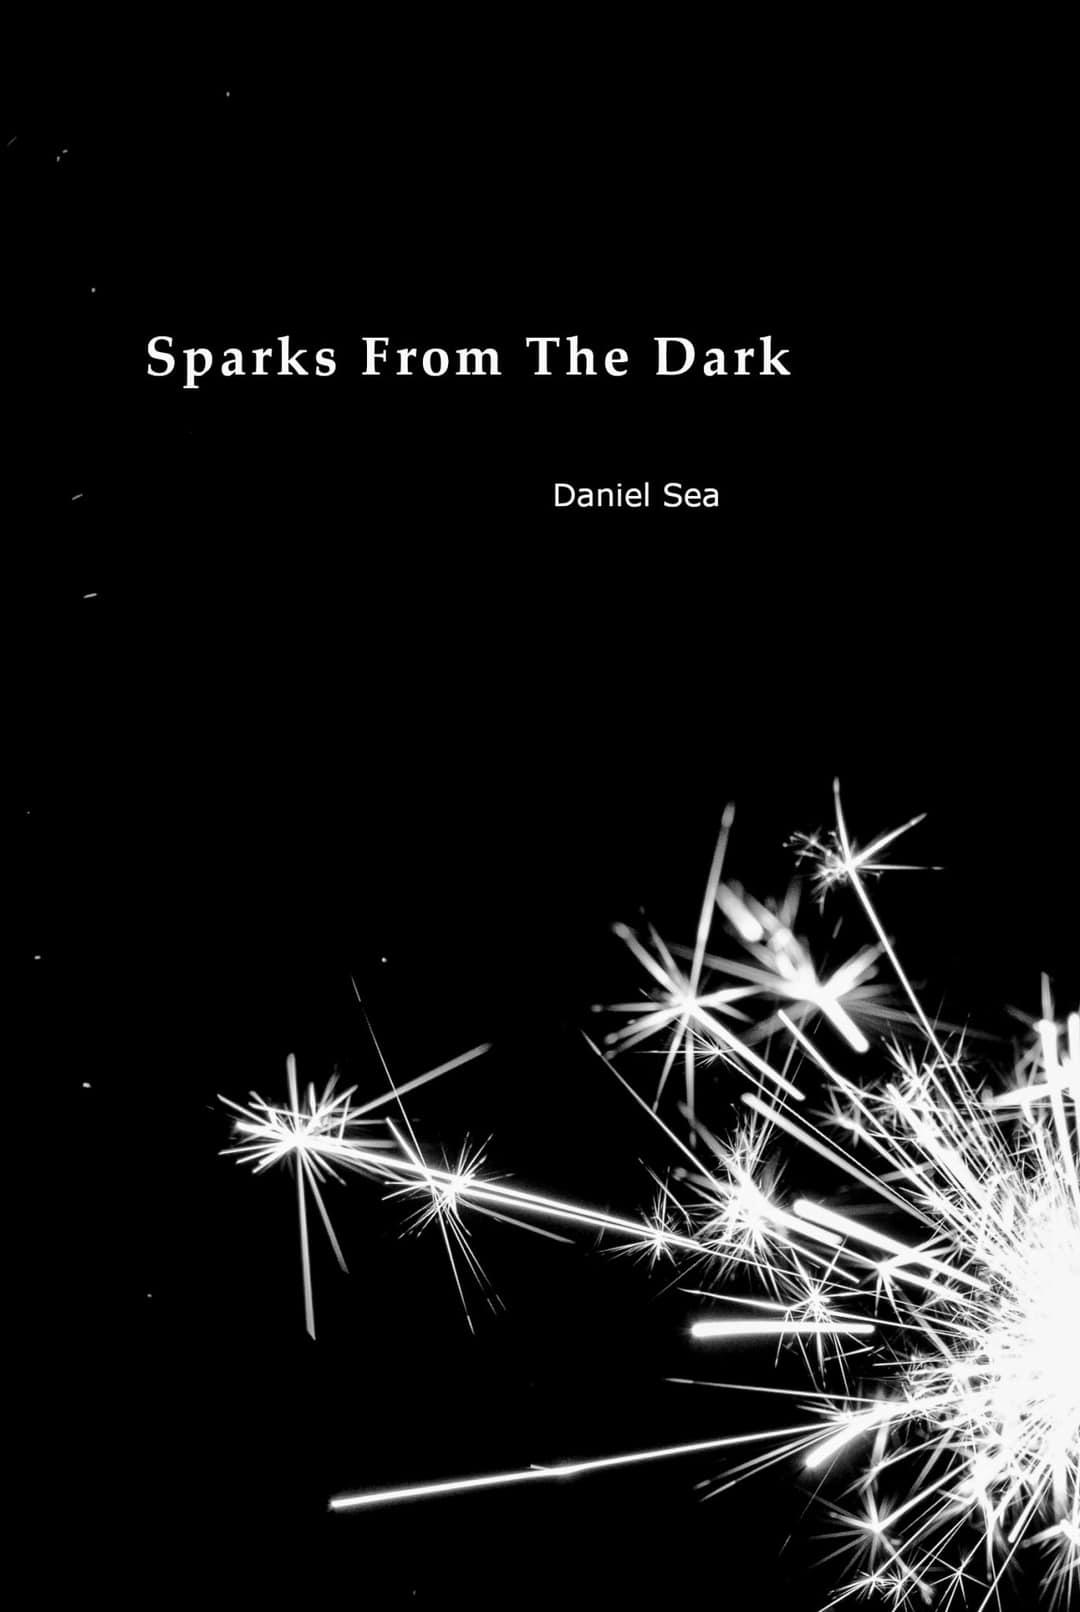 Sparks from the dark book cover